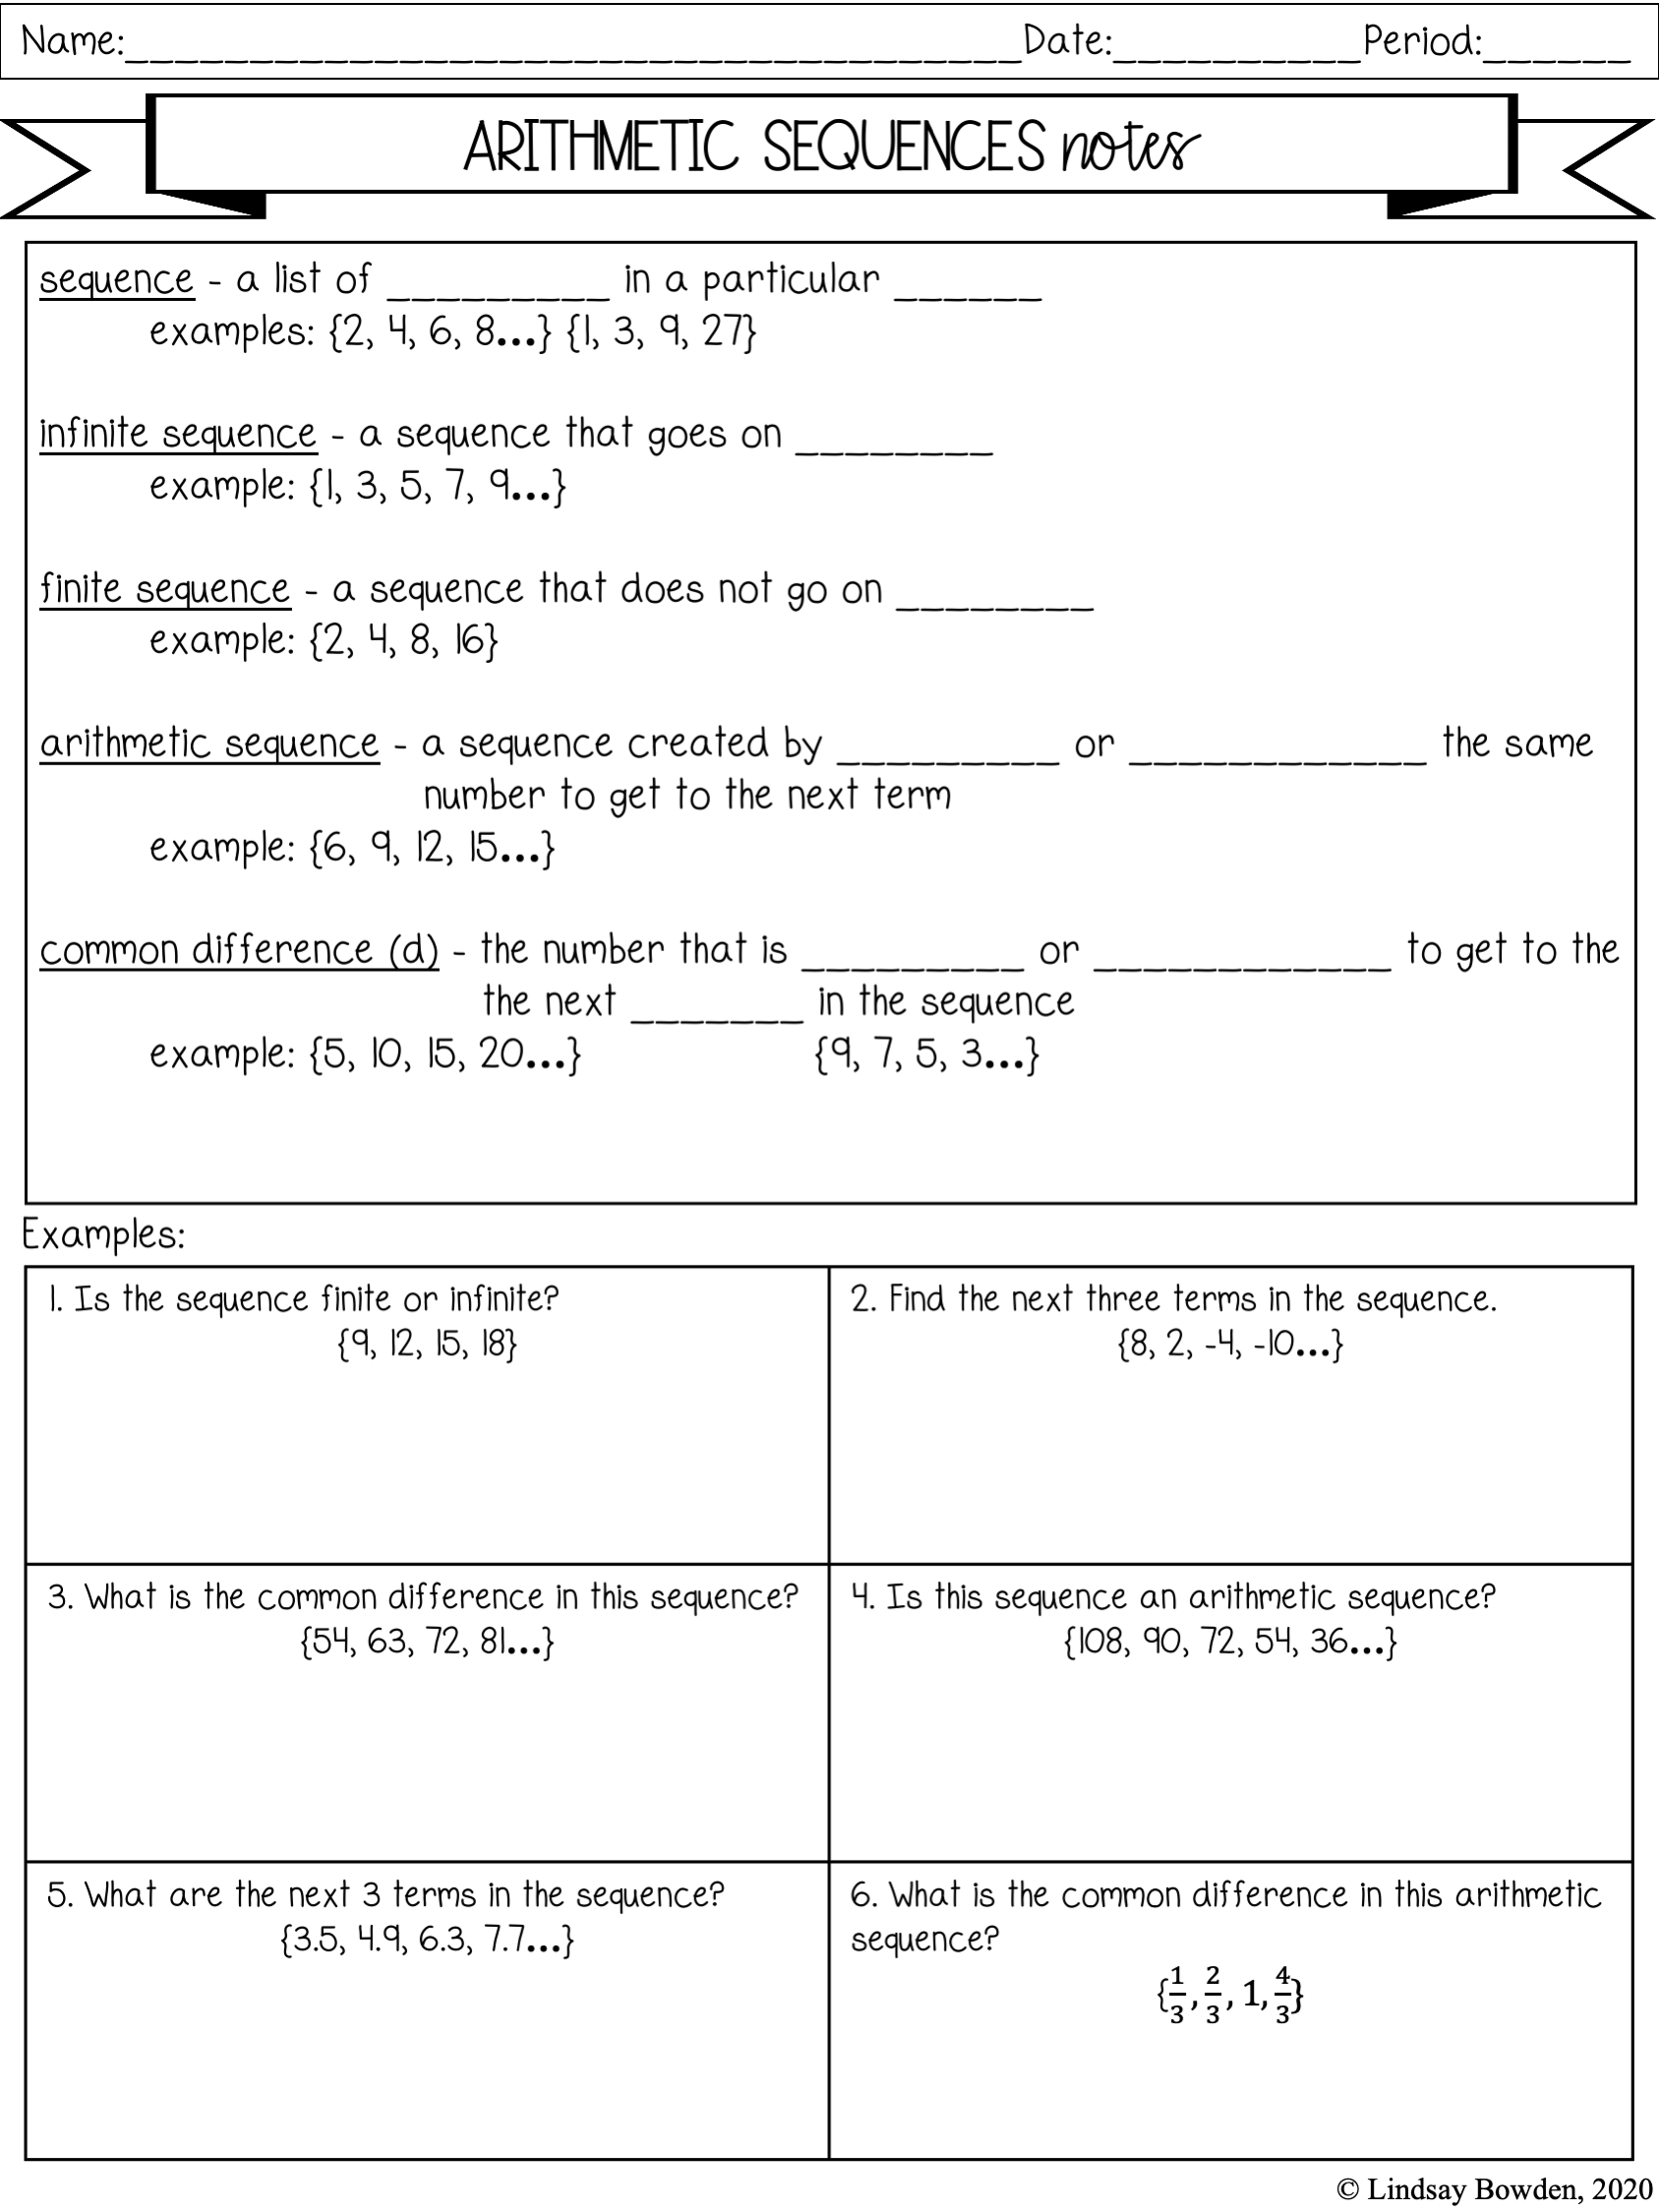 Arithmetic Sequences Notes and Worksheets - Lindsay Bowden Pertaining To Arithmetic Sequences And Series Worksheet